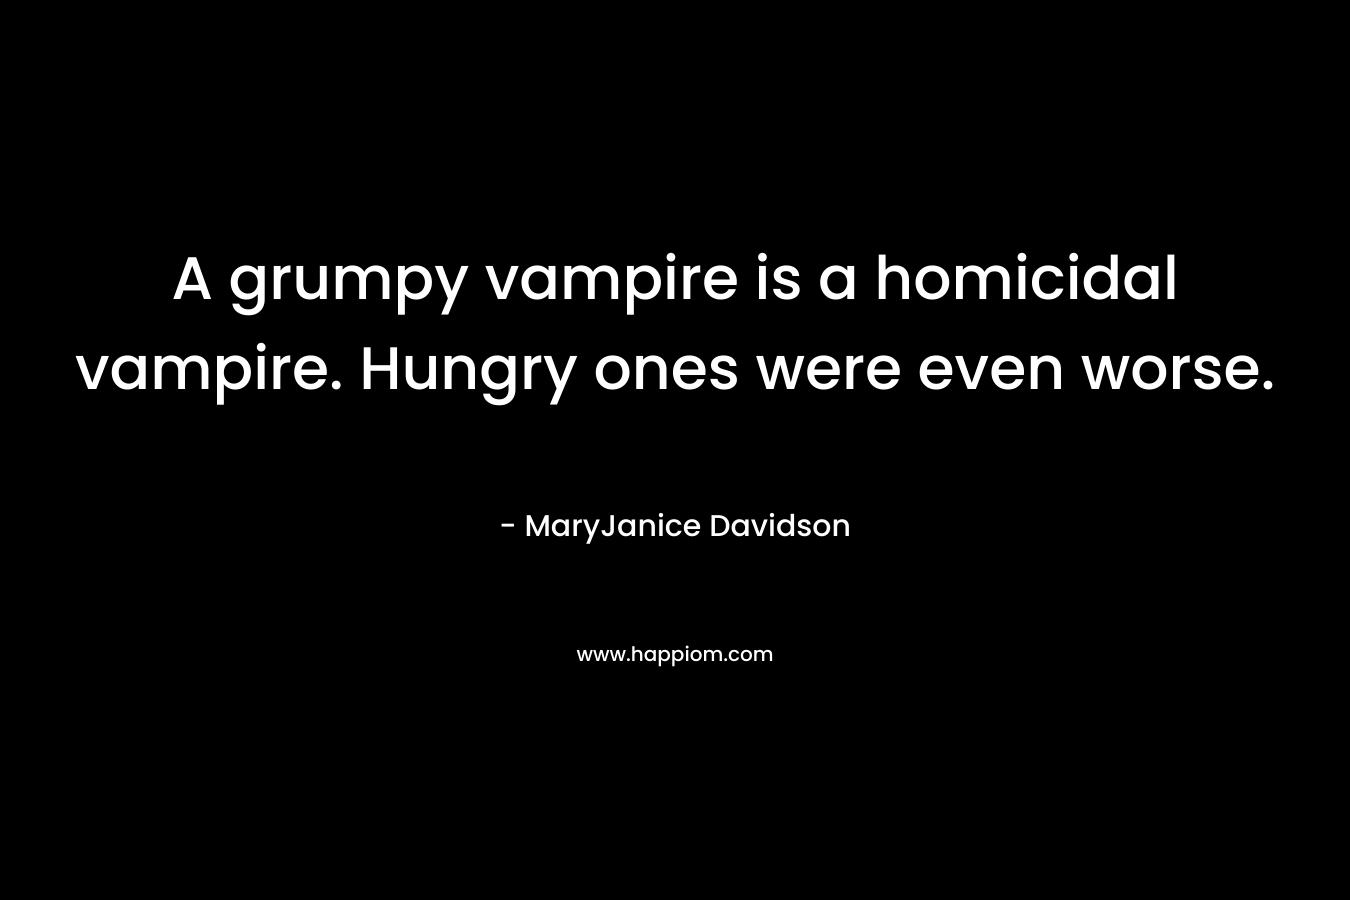 A grumpy vampire is a homicidal vampire. Hungry ones were even worse.